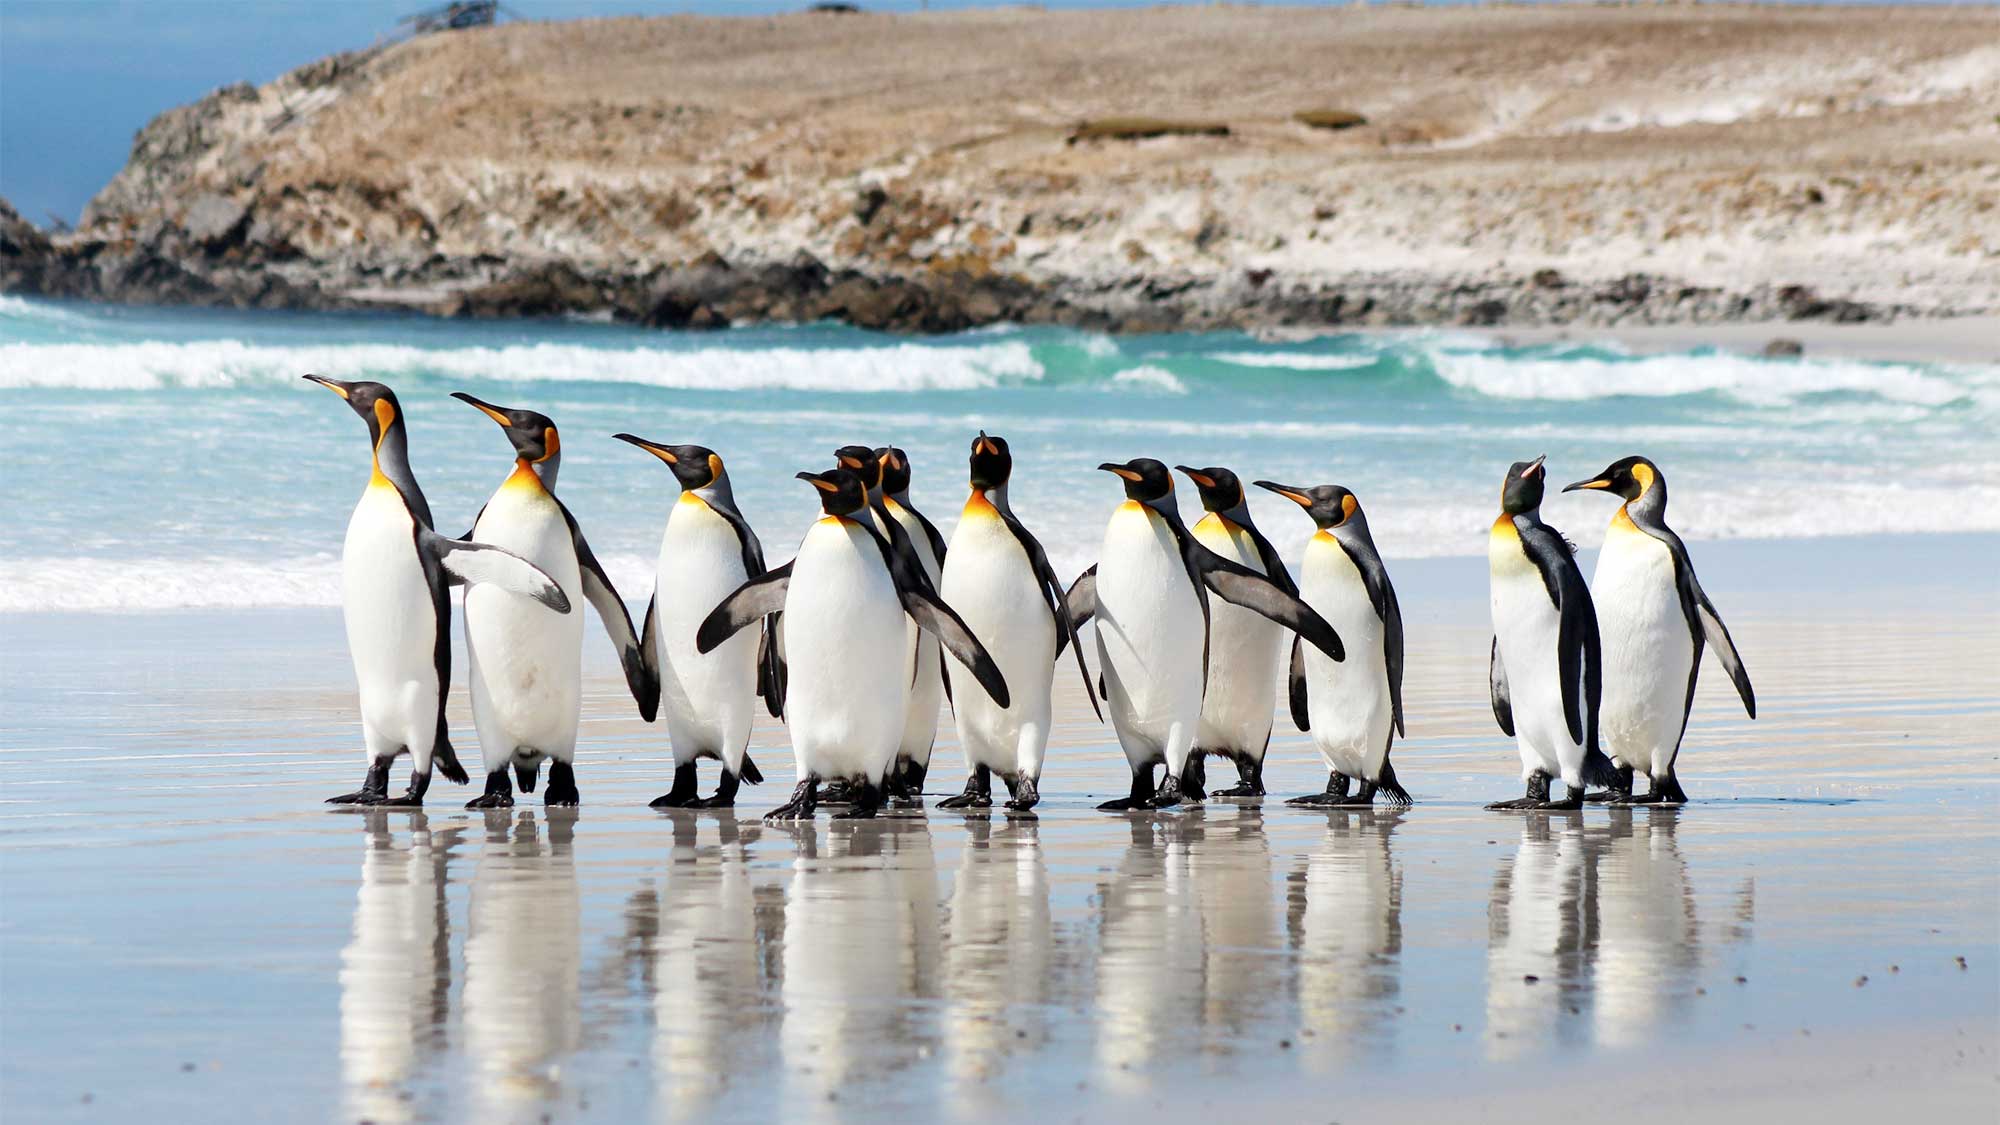 Where to See Penguins in Antarctica